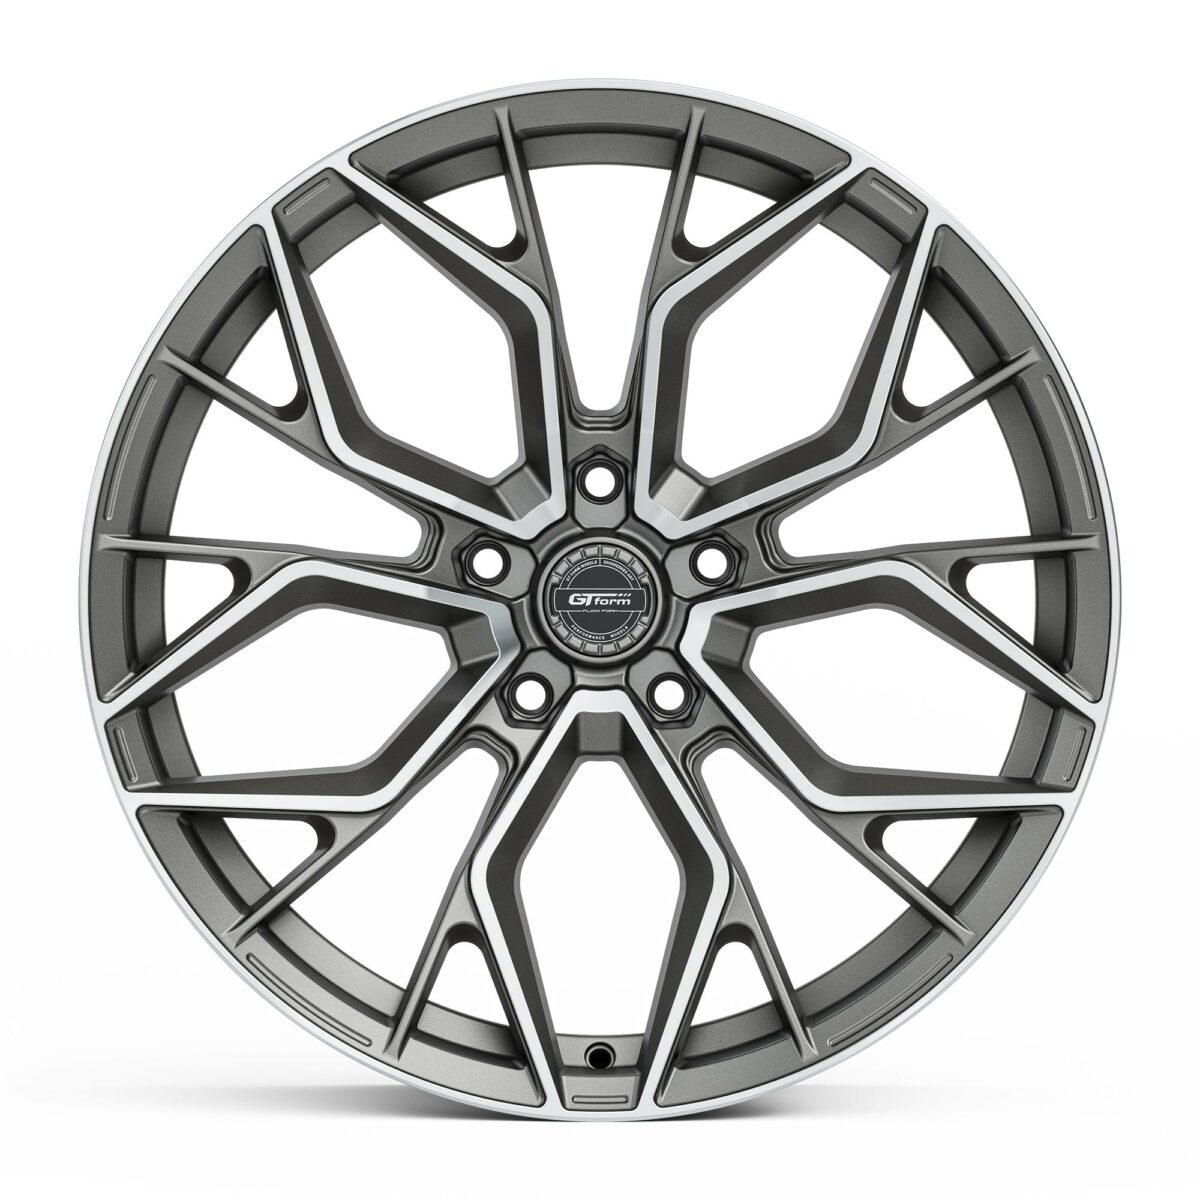 GT Form Marquee Satin Gunmetal Machined Face Staggered Rims 19 inch Performance Wheels